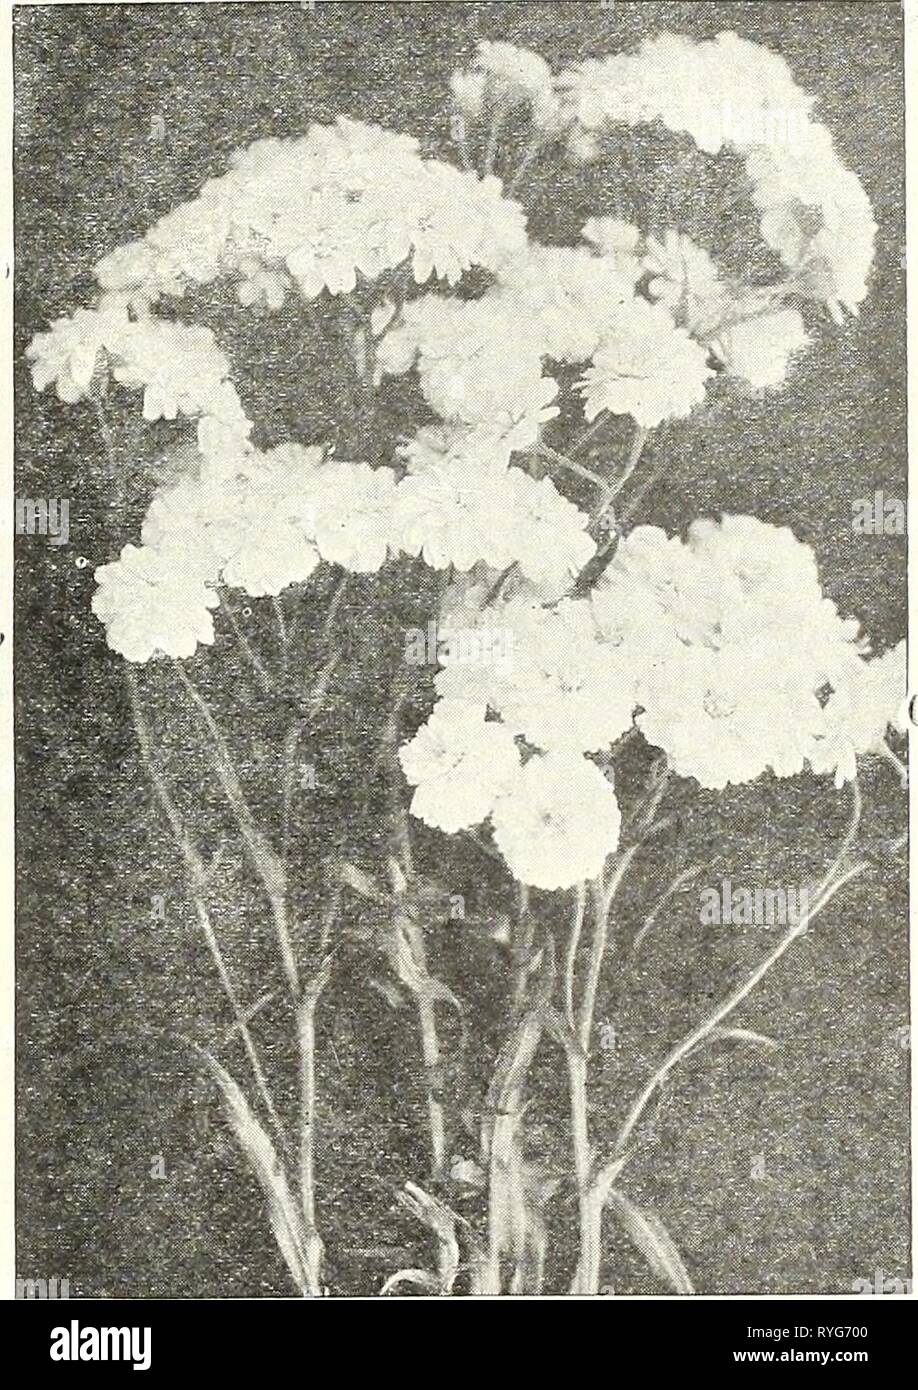 Dreer's wholesale price list : flower seeds for florists plants for florists bulbs for florists vegetable seeds fertilizers, fungicides, insecticides, implements, etc  dreerswholesalep1922henr Year: 1922    ANCHUSA ITALICA. DROPMORK VARIETY ACHILLEA PTARMICA 'THE PEARL' Anchusa Italica. These wonderfully improved Anchusas have proven most valu- able additions to our limited list of blue flowering hardy perennials, and particularly so as they flower from May to July, a time when this color is only sparingly represented in the hardy border. Dropmore Variety. Rich gentian blue  Strong plants. $2 Stock Photo